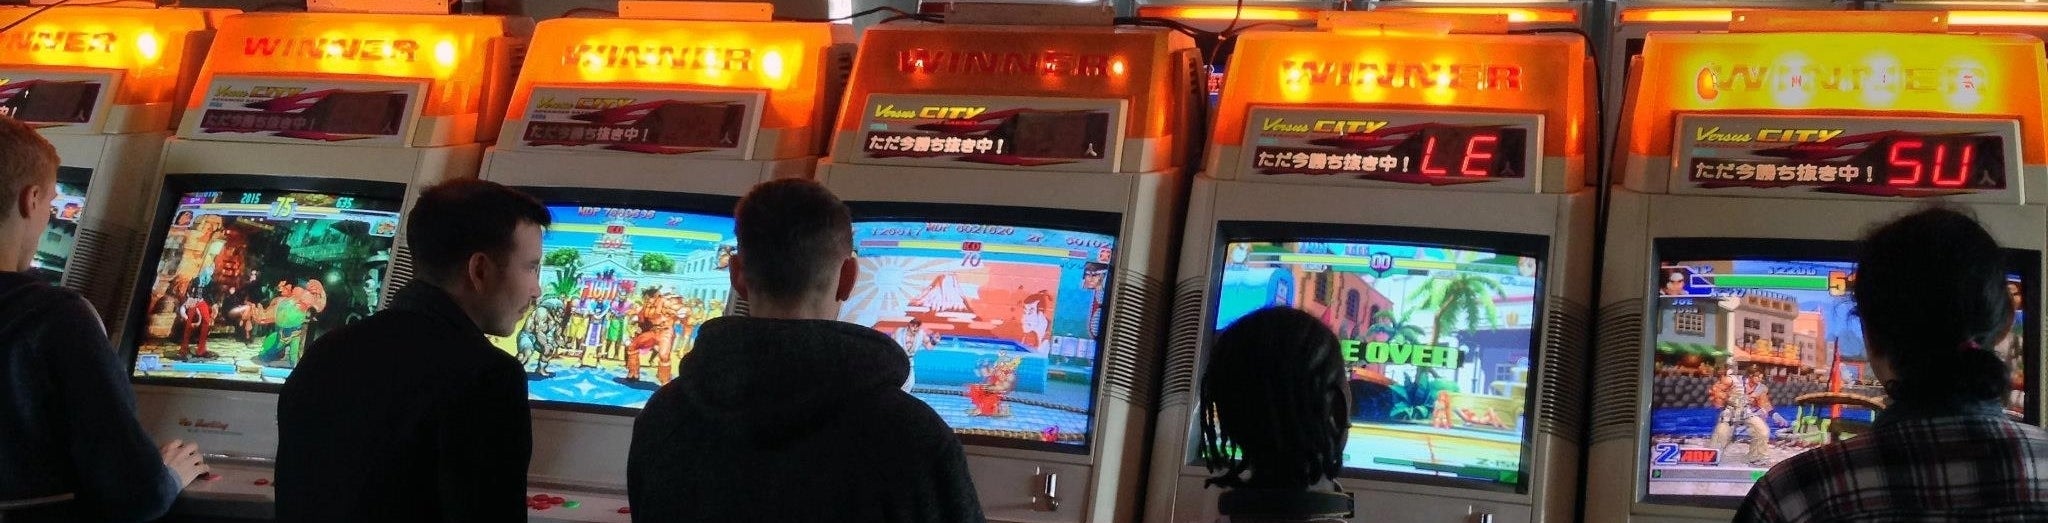 Image for The last arcade